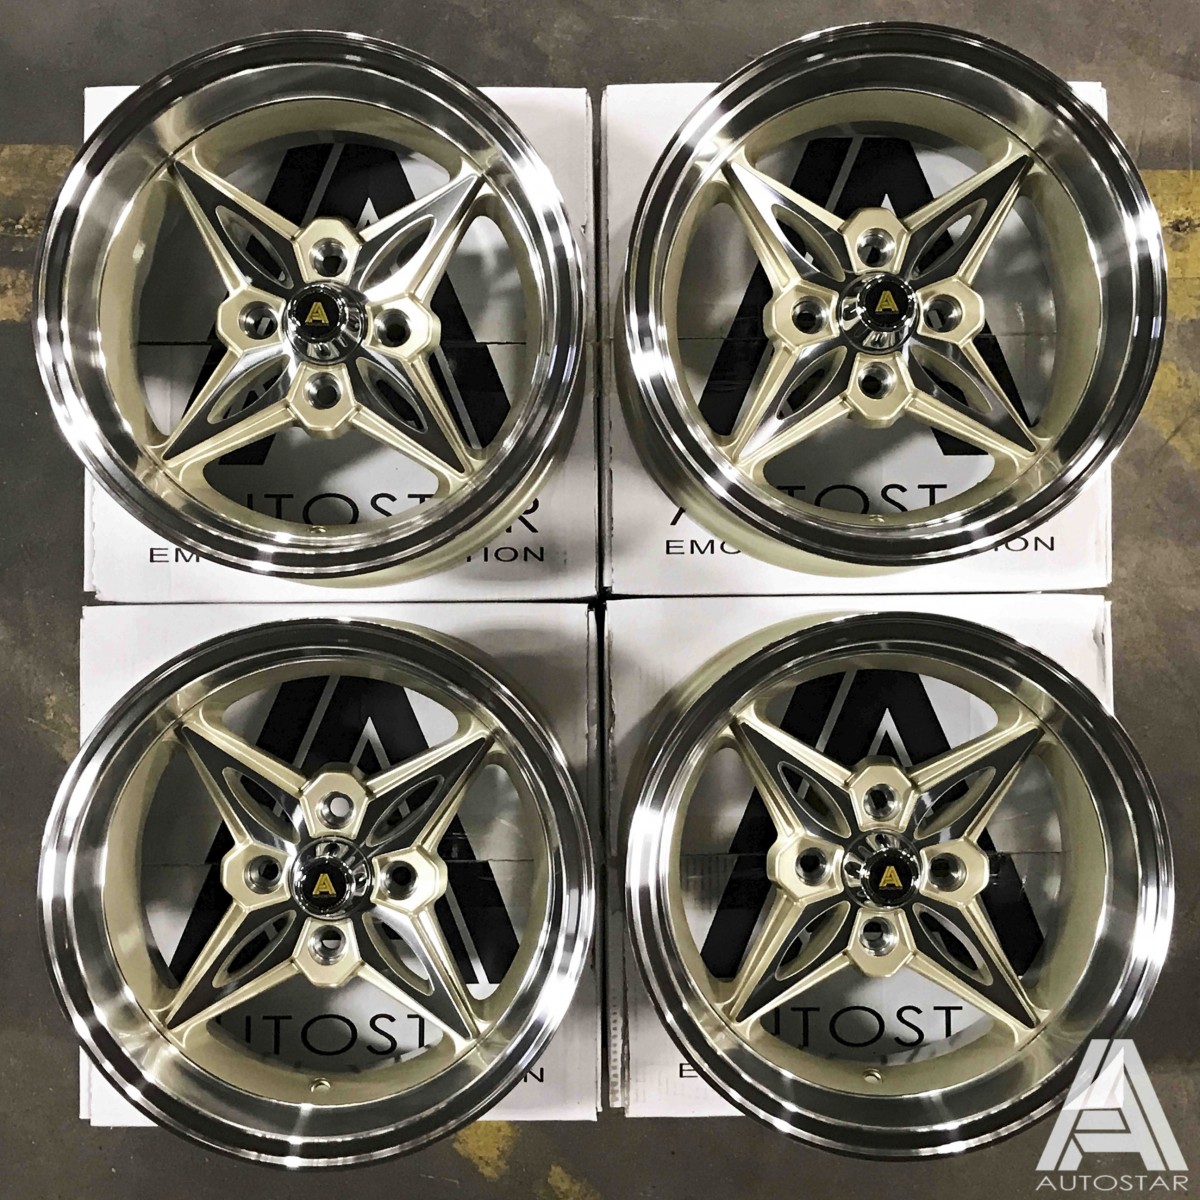 AutoStar Kanji 14x8.0 4x100 ET-5 Polished Lip with Champagne Gold Centre - Set of 4